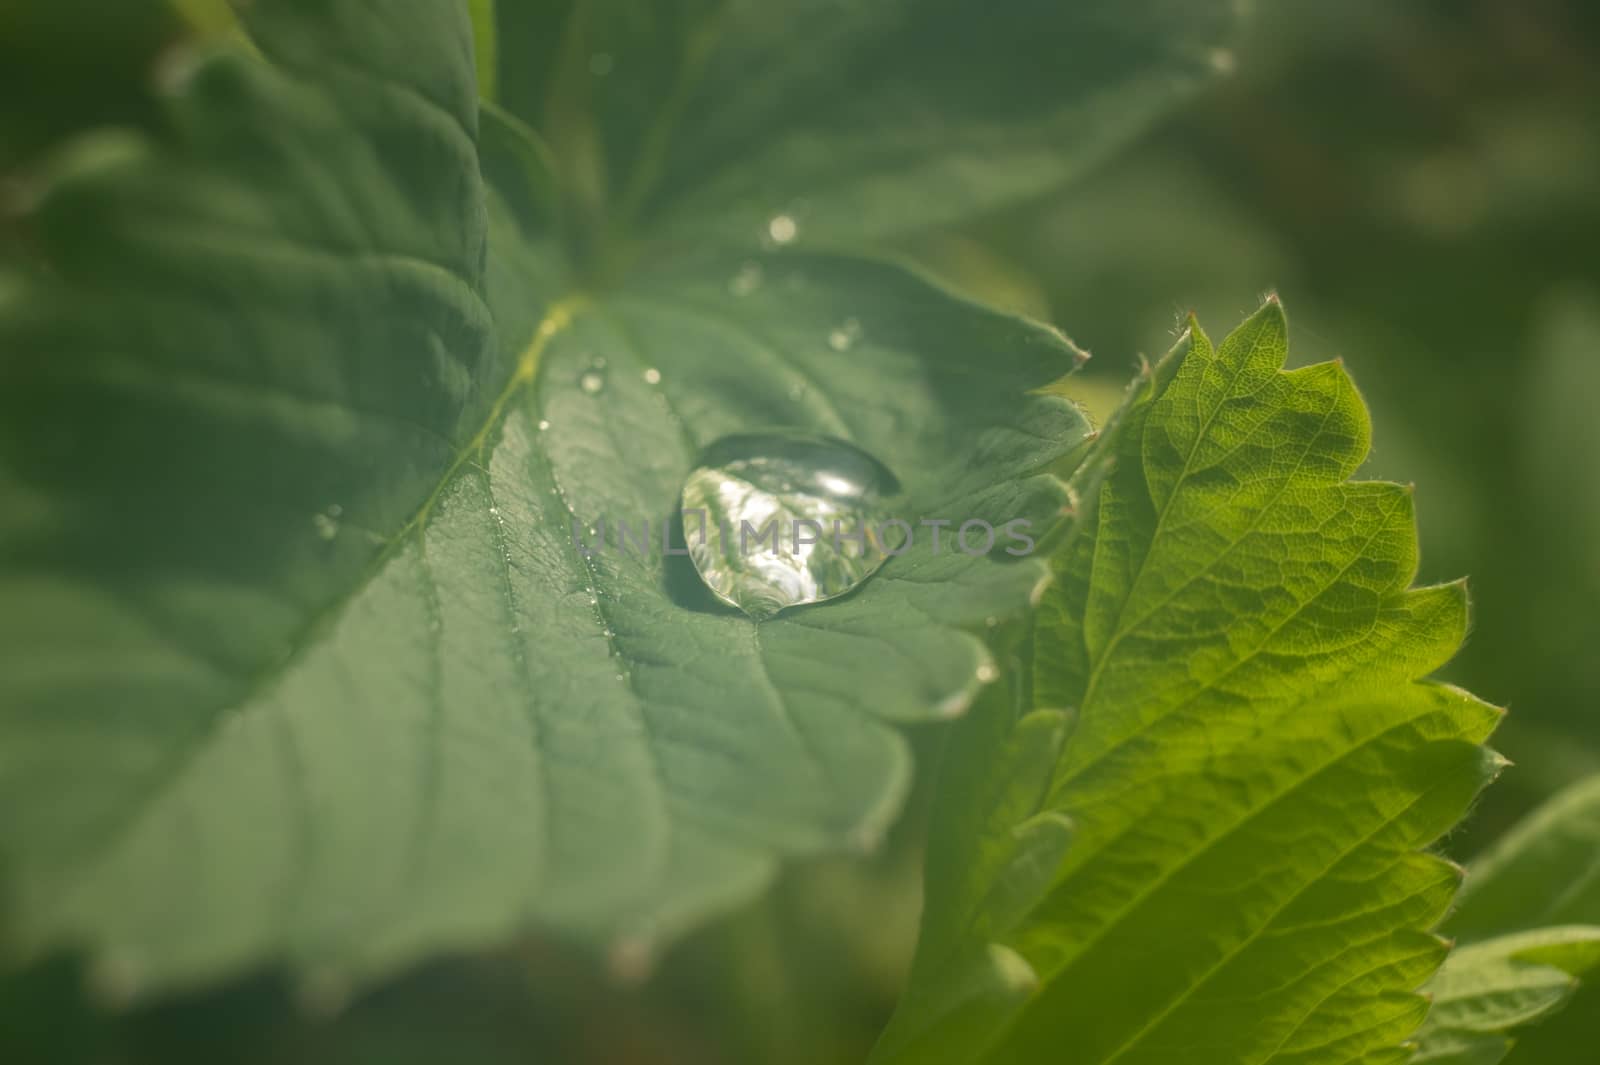 Glistening droplets of water or rain on a broad fresh green leaf outdoors in a garden for bio or eco concepts in close up